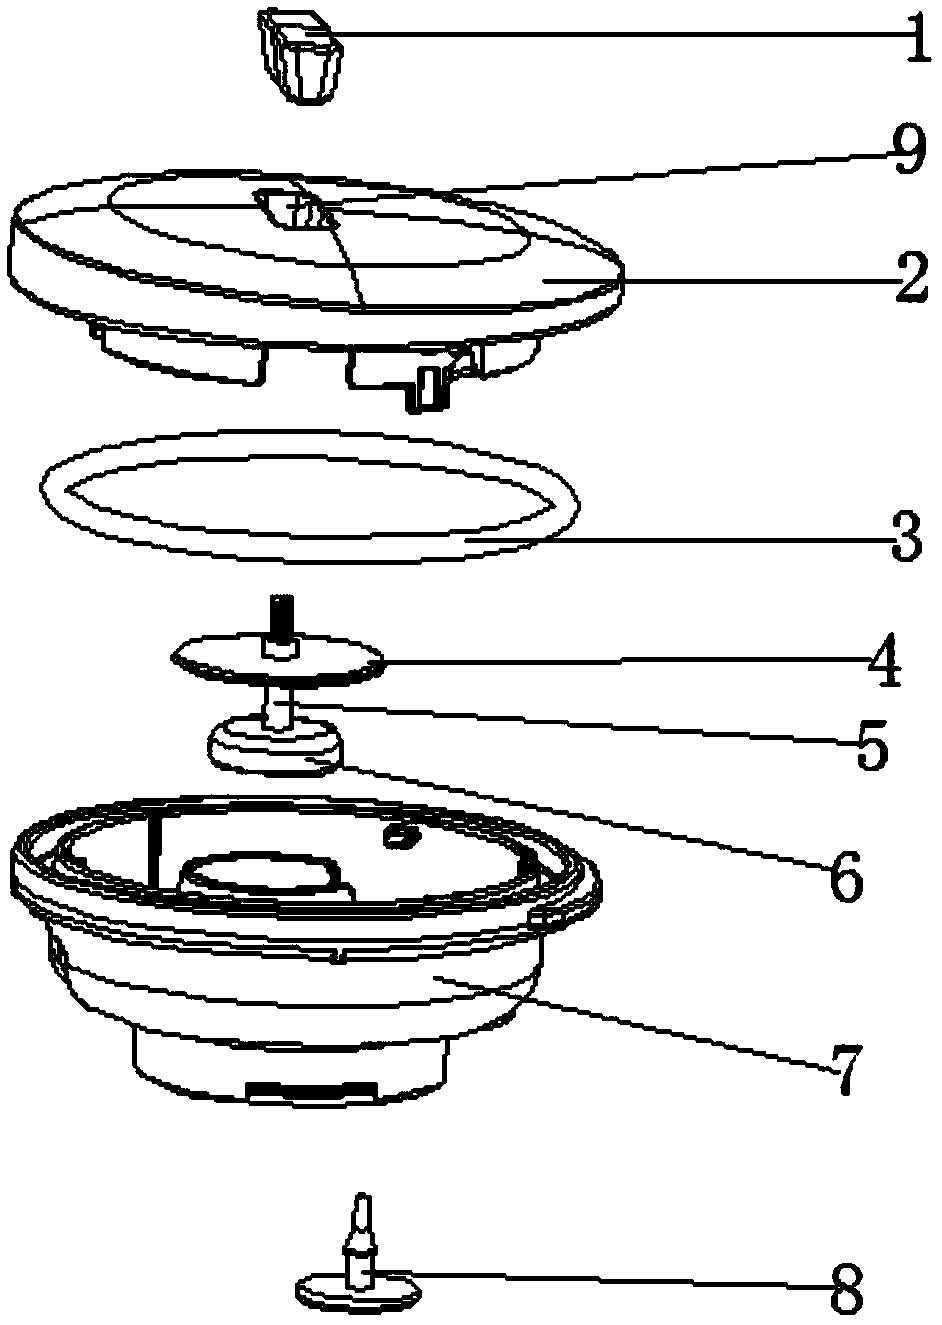 Steam valve and cooking utensils having the same